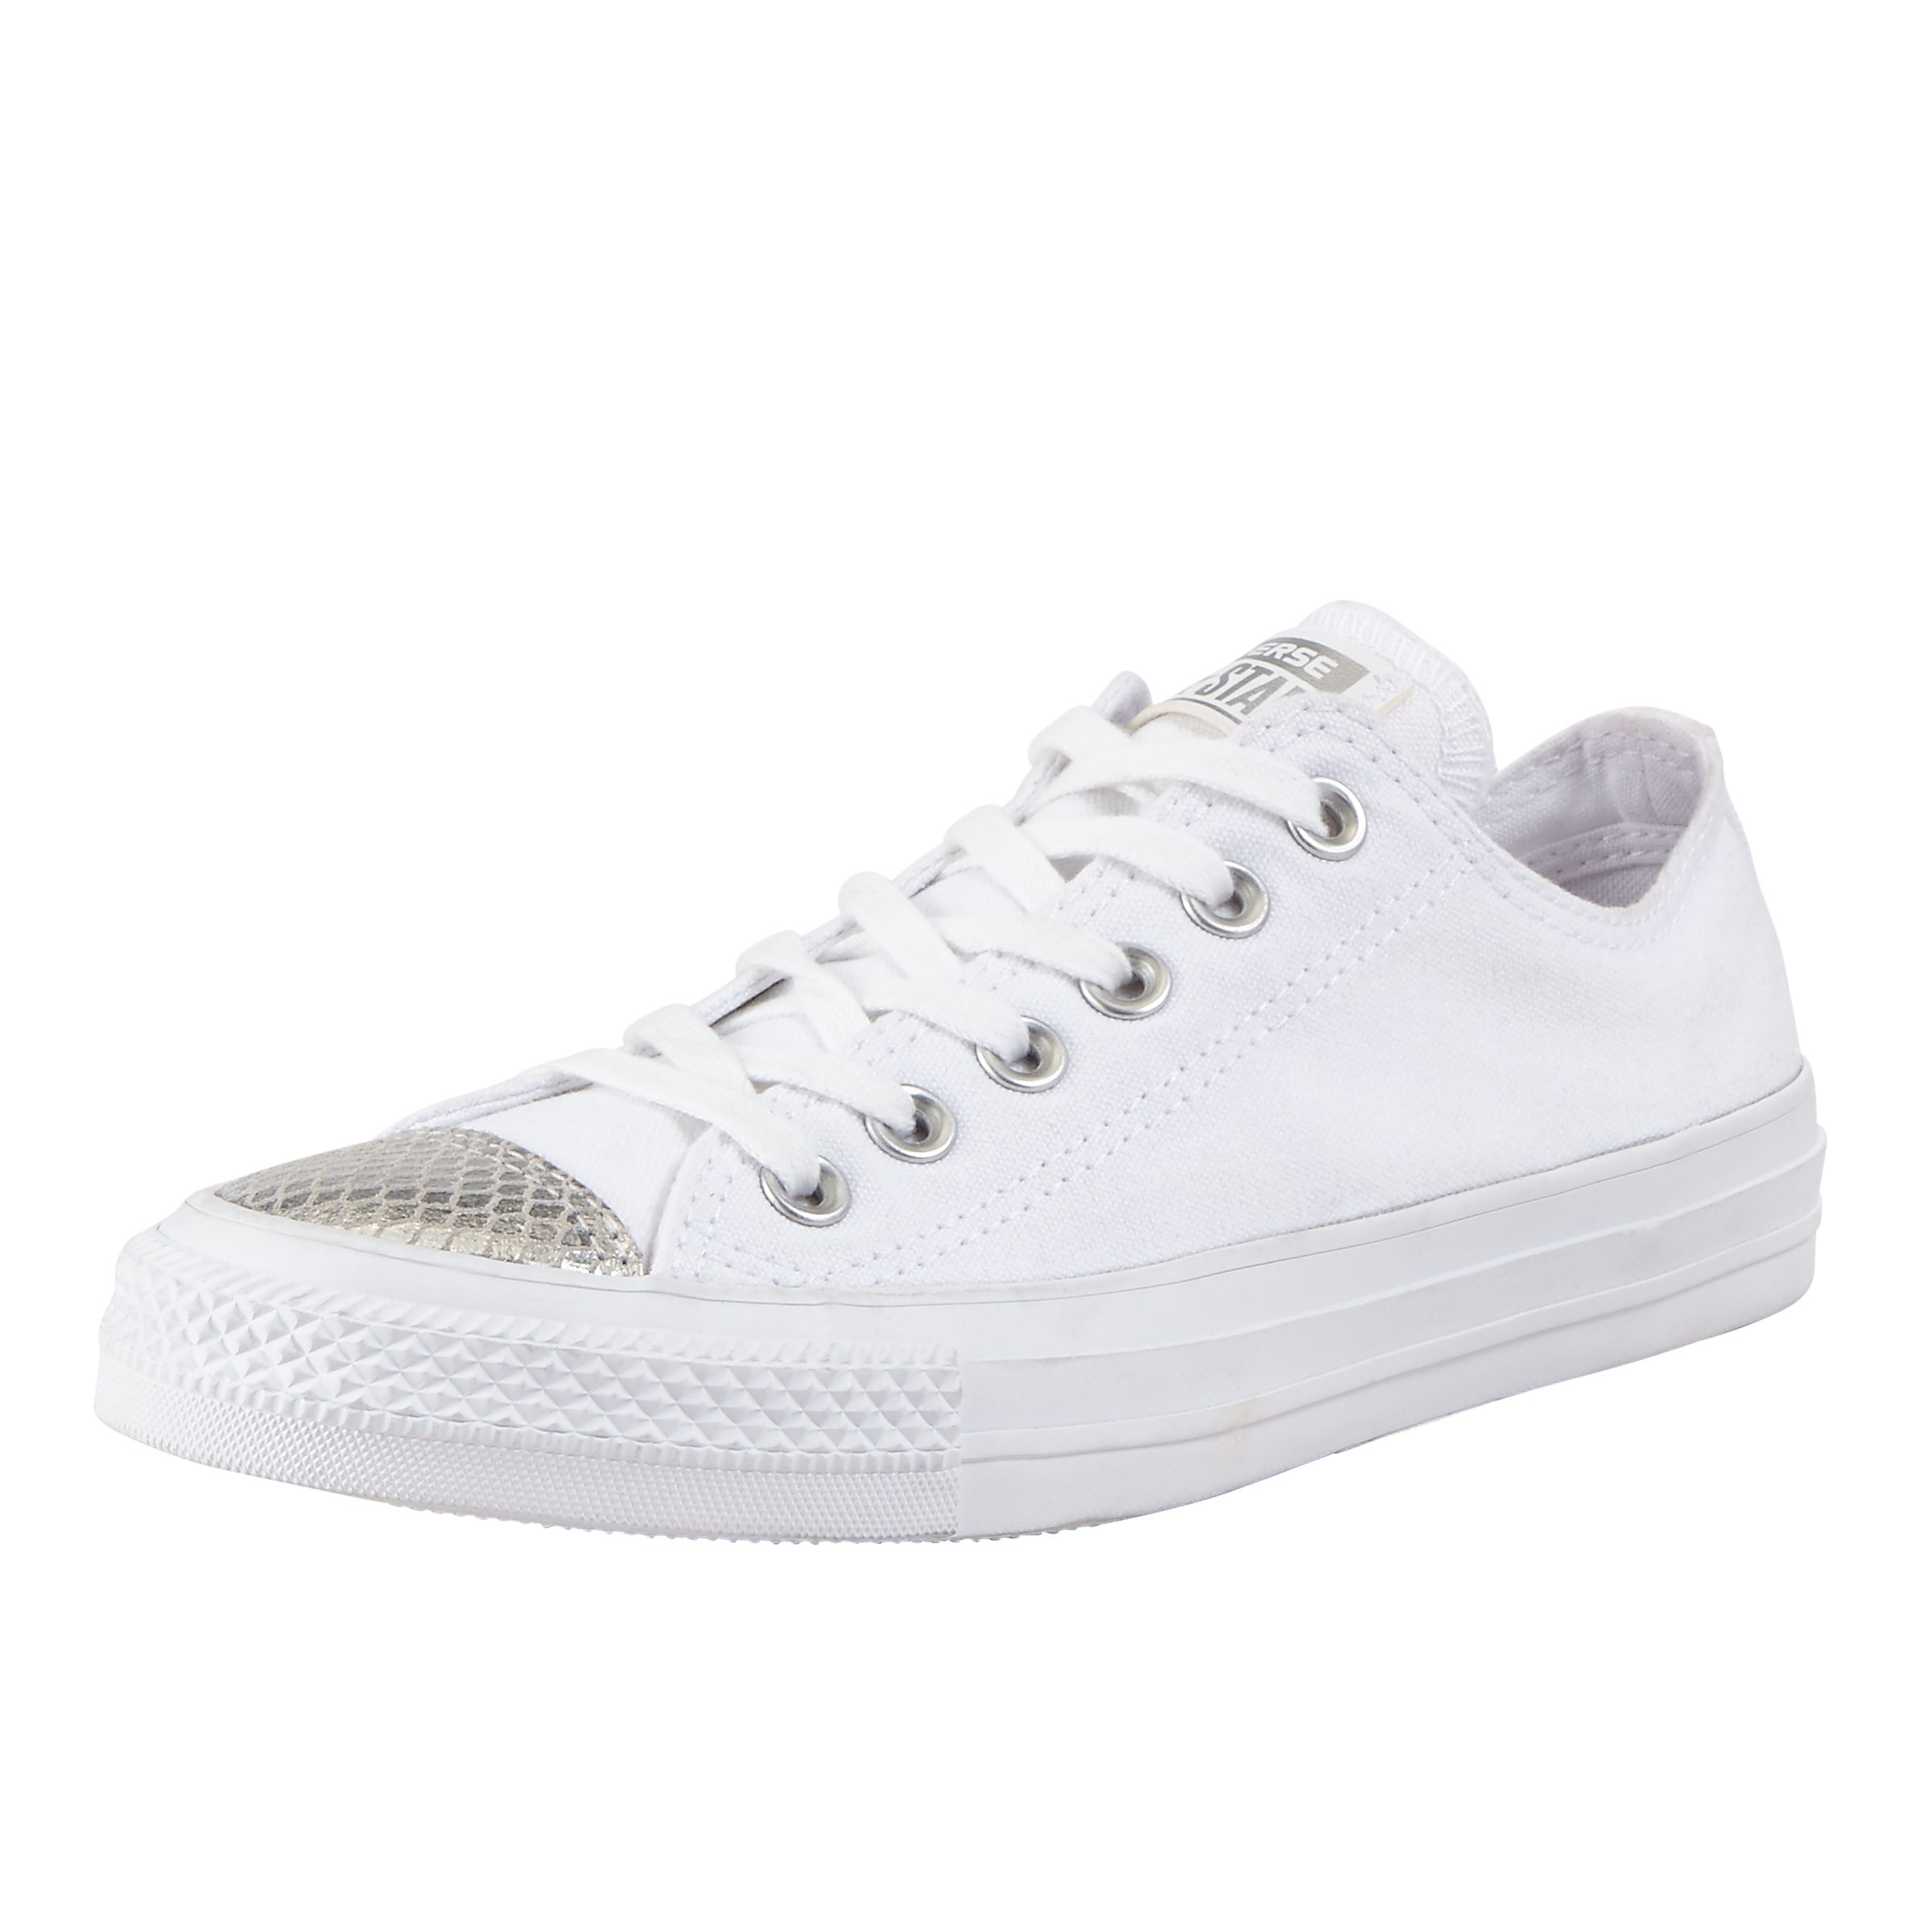 white & gold chuck taylor all star craft ox trainers